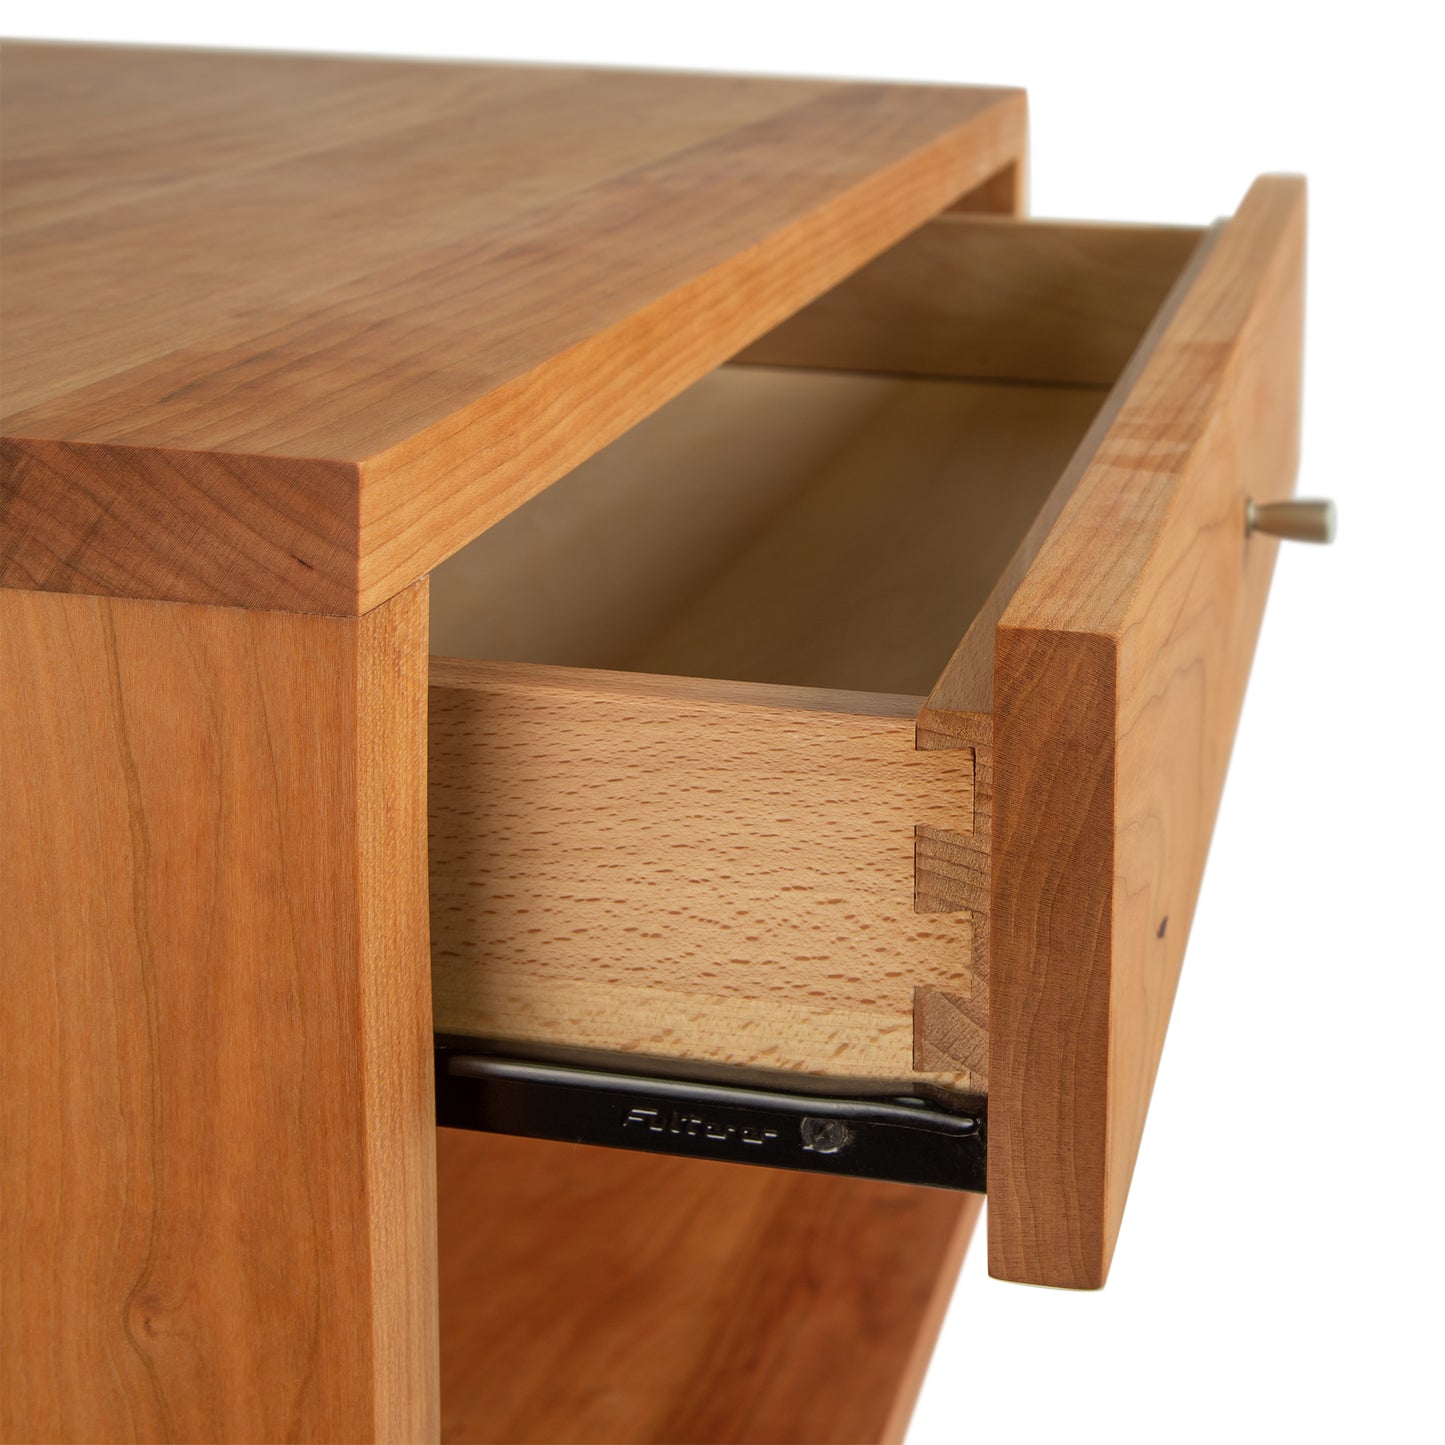 A close up of a Larssen 1-Drawer Wide Nightstand in natural cherry wood as part of the Vermont Furniture Designs Collection.